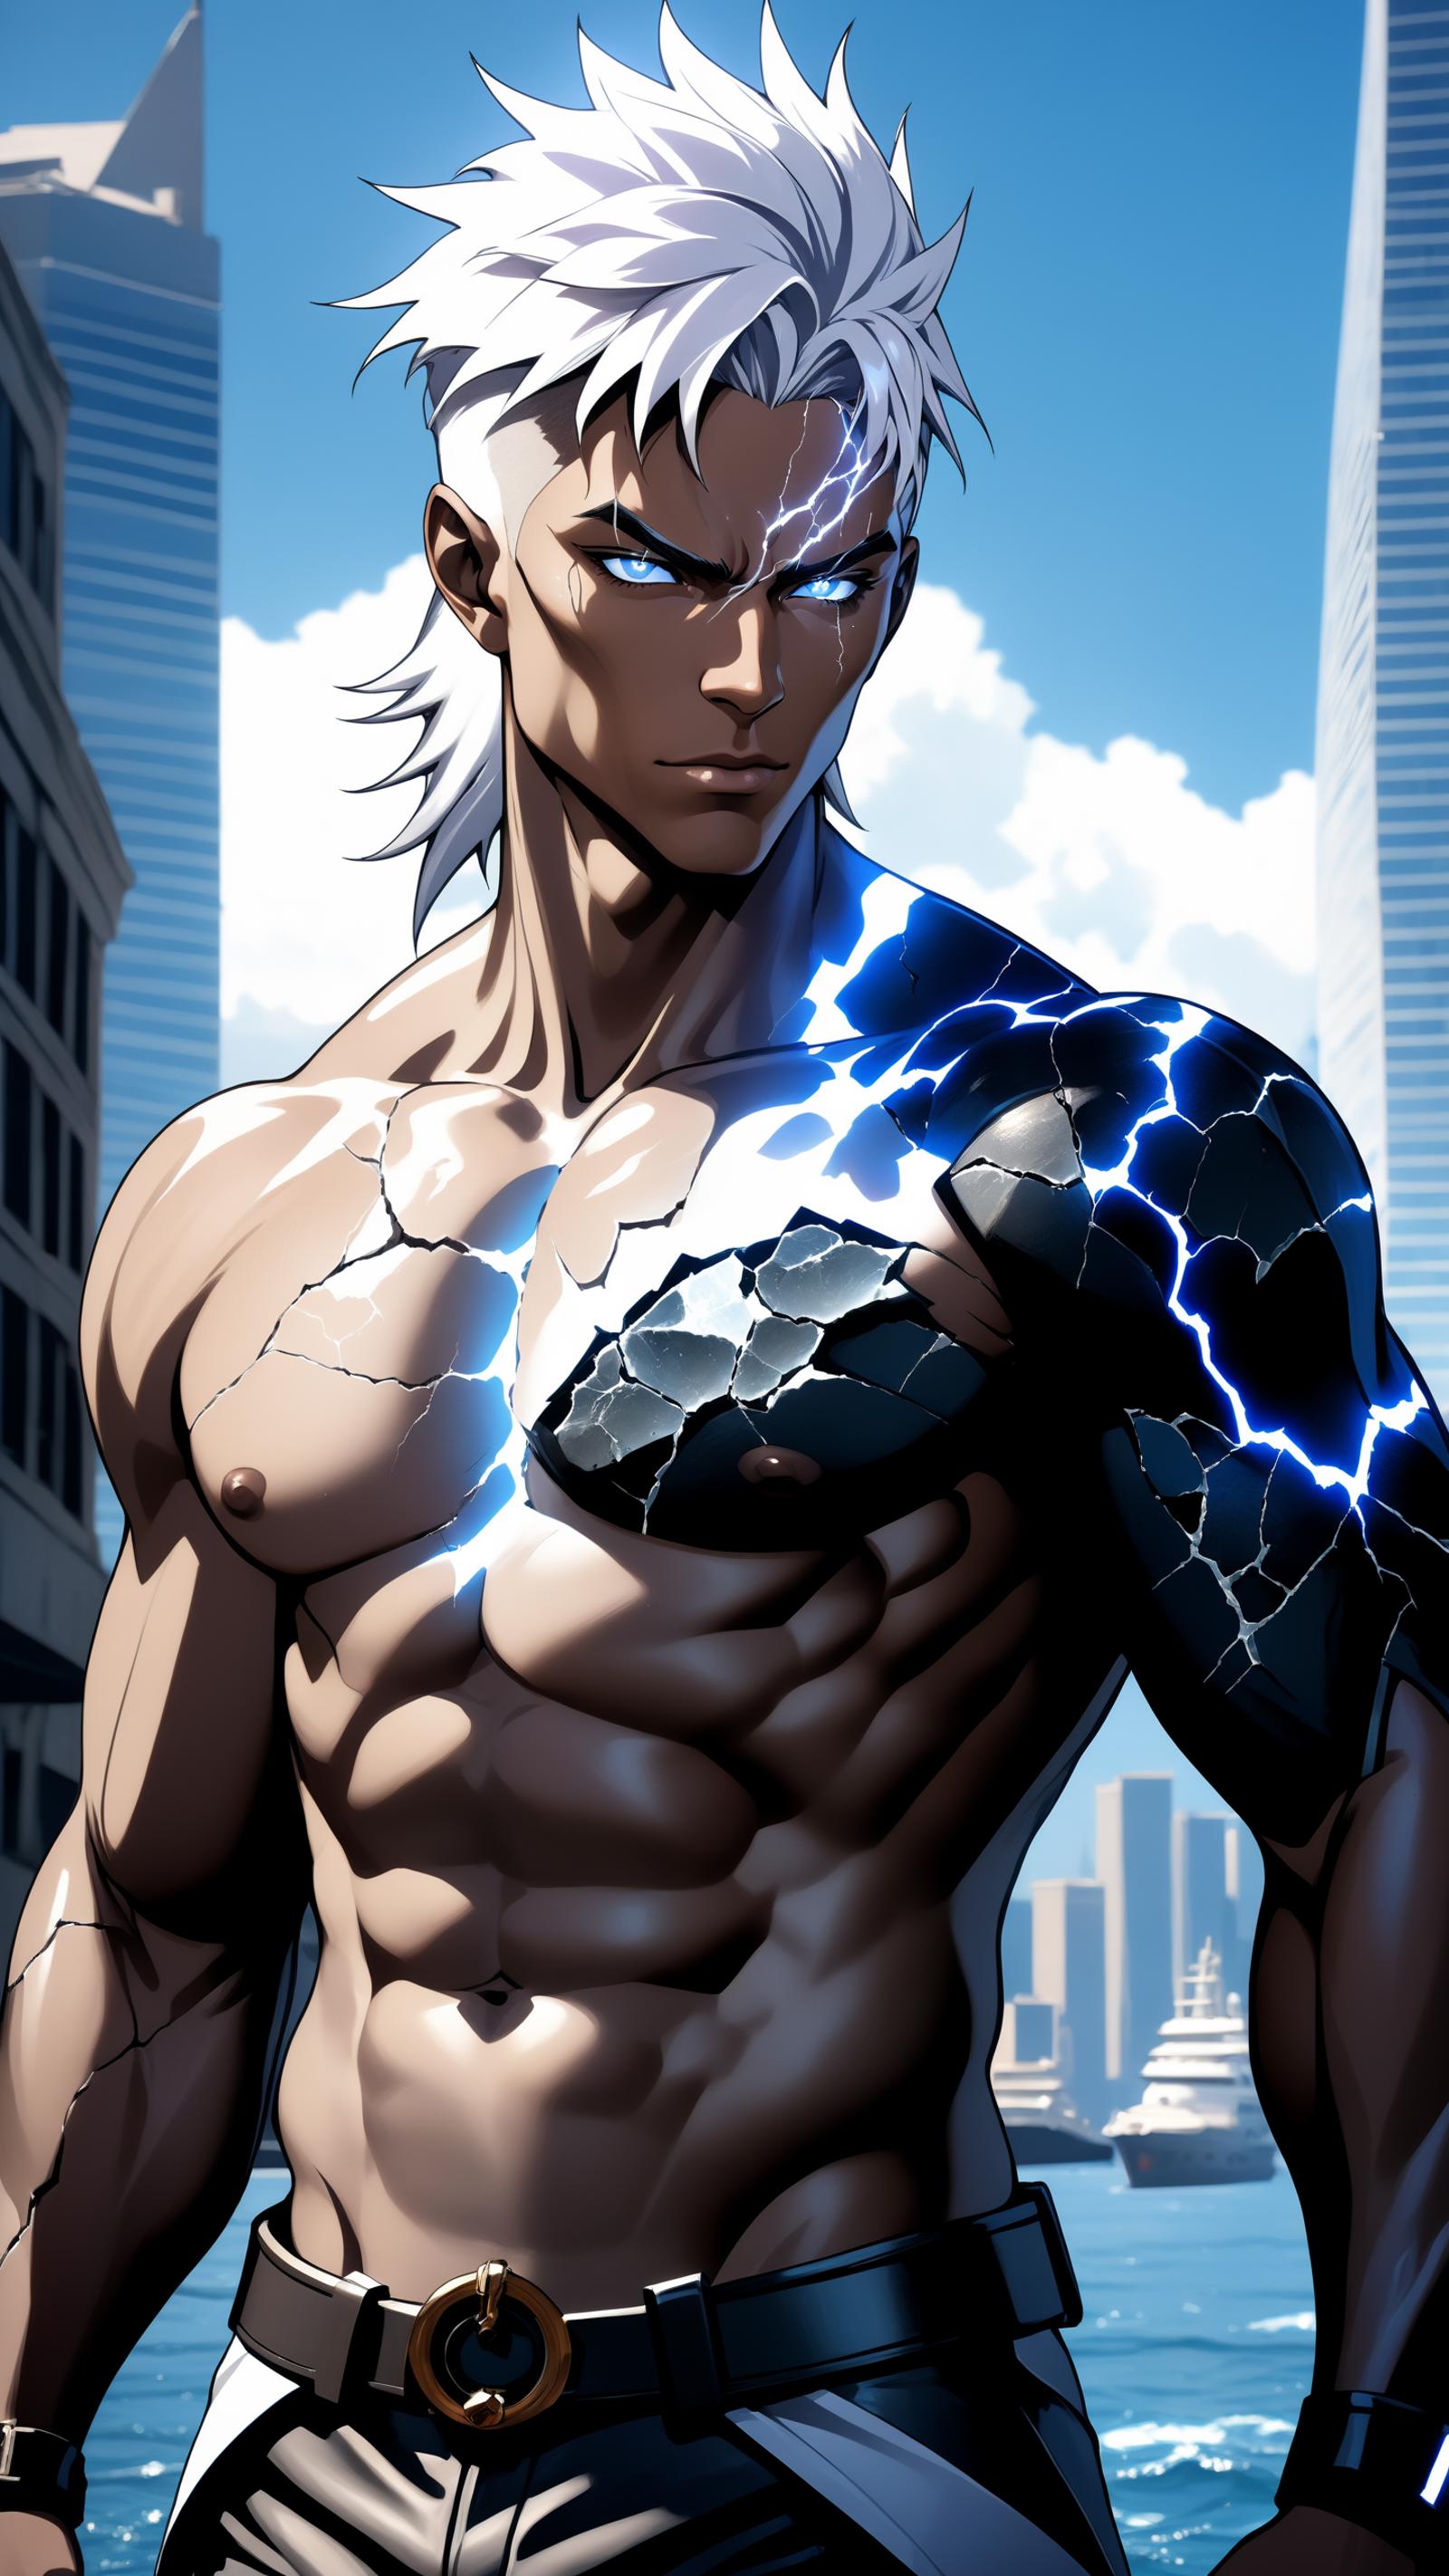 A shirtless man with blue eyes and a cracked arm, standing in front of a cityscape.